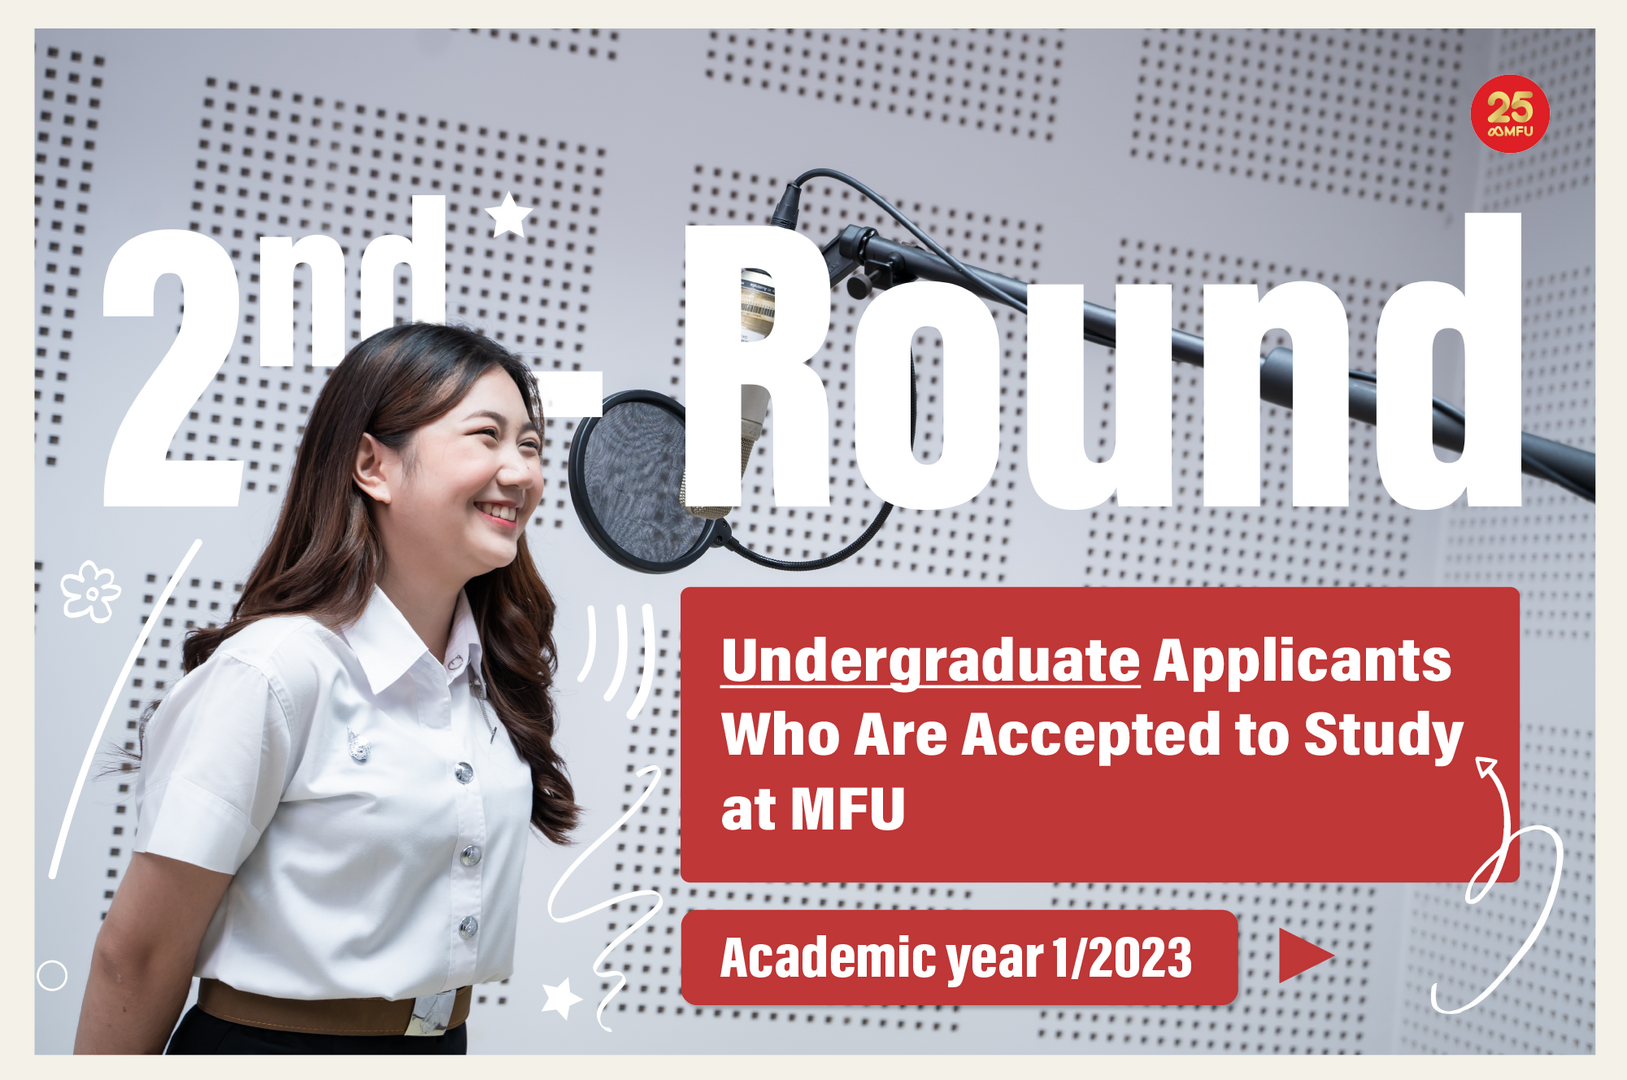 Announcement of the 2nd-Round Undergraduate Applicants Who Are Accepted to Study at MFU